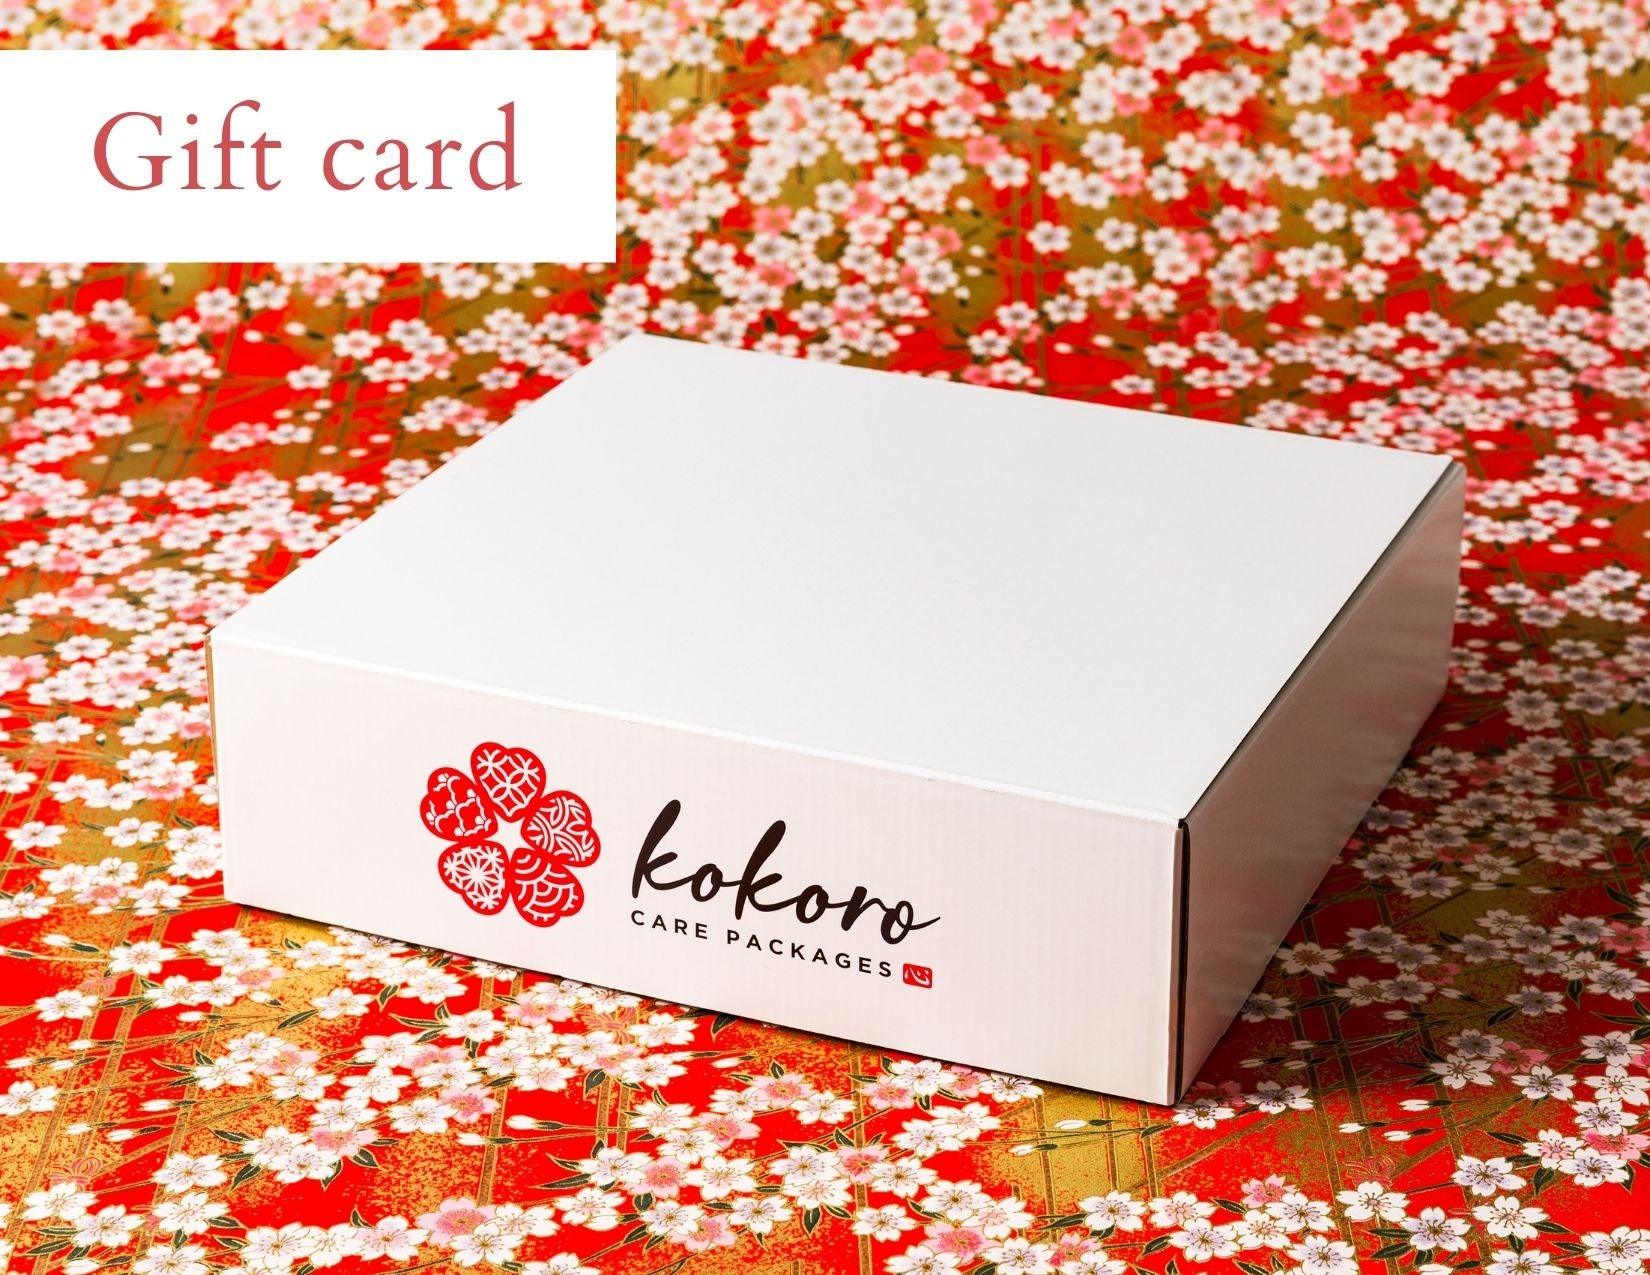 Kokoro Care Packages Collections Gift Card